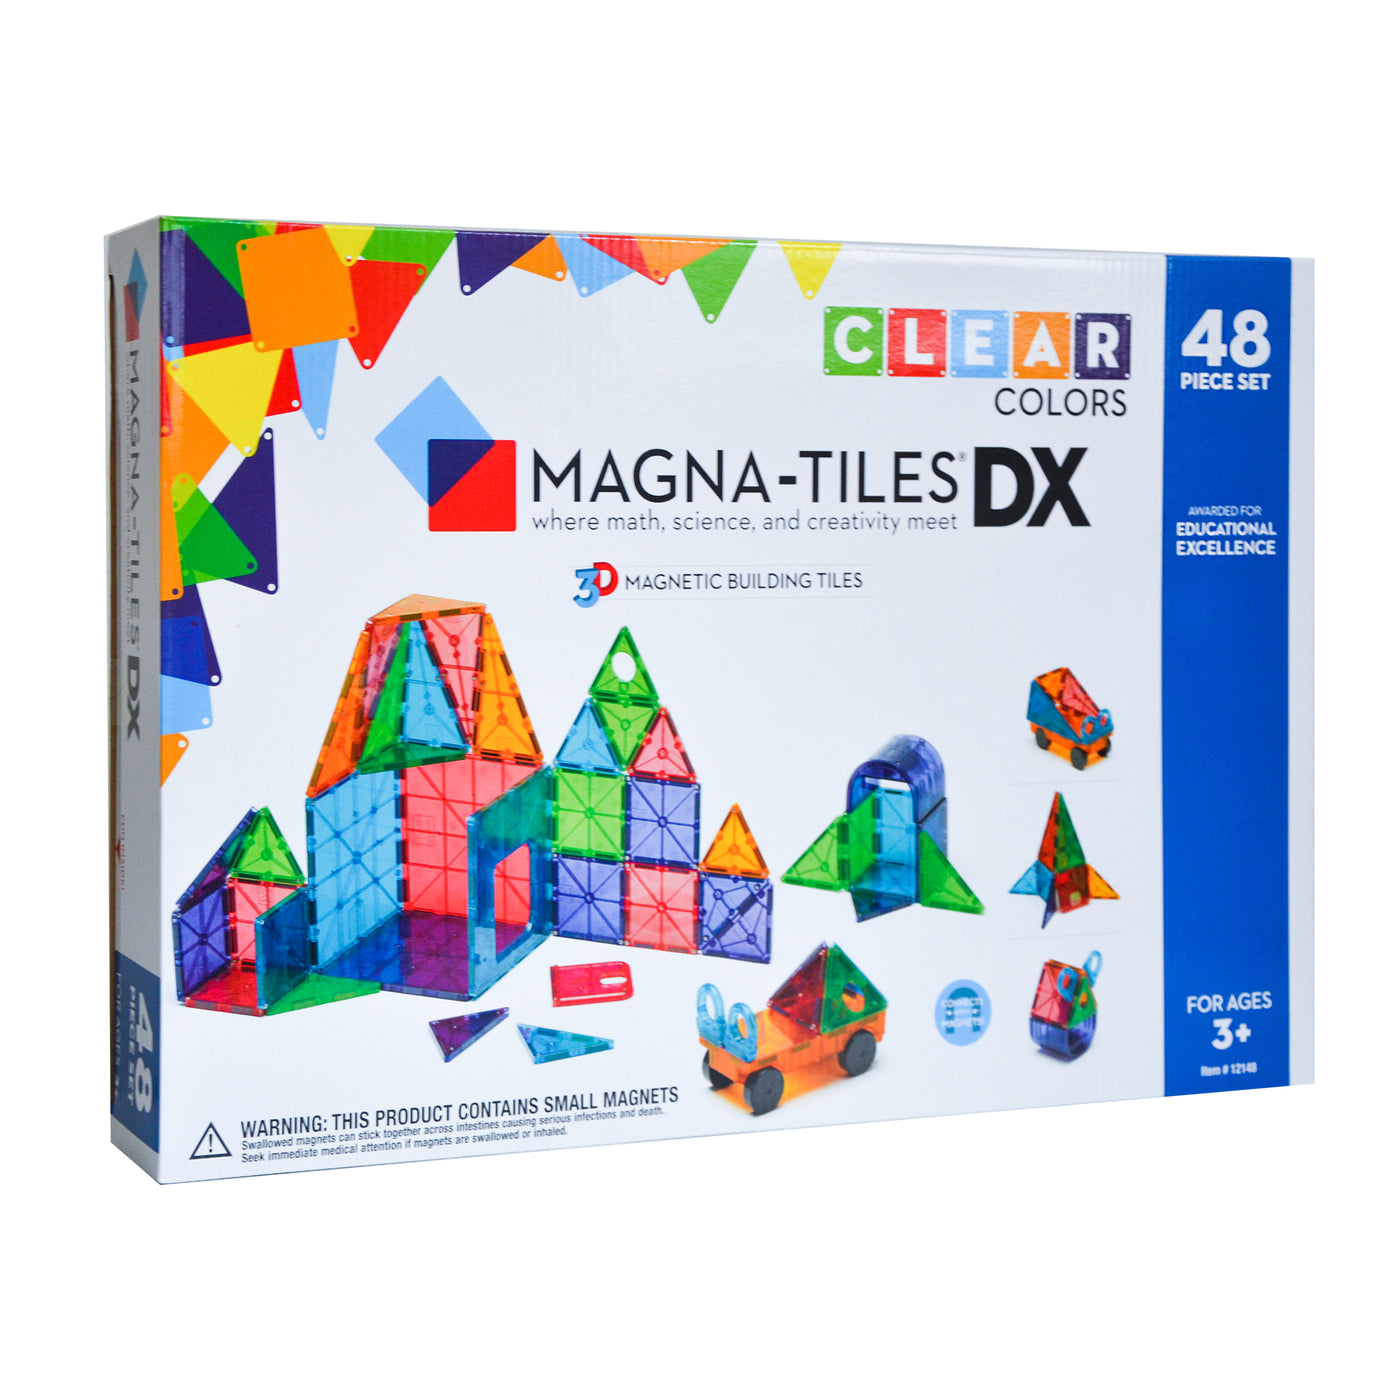 Byggemagneter, clear colors 48 dele deluxe